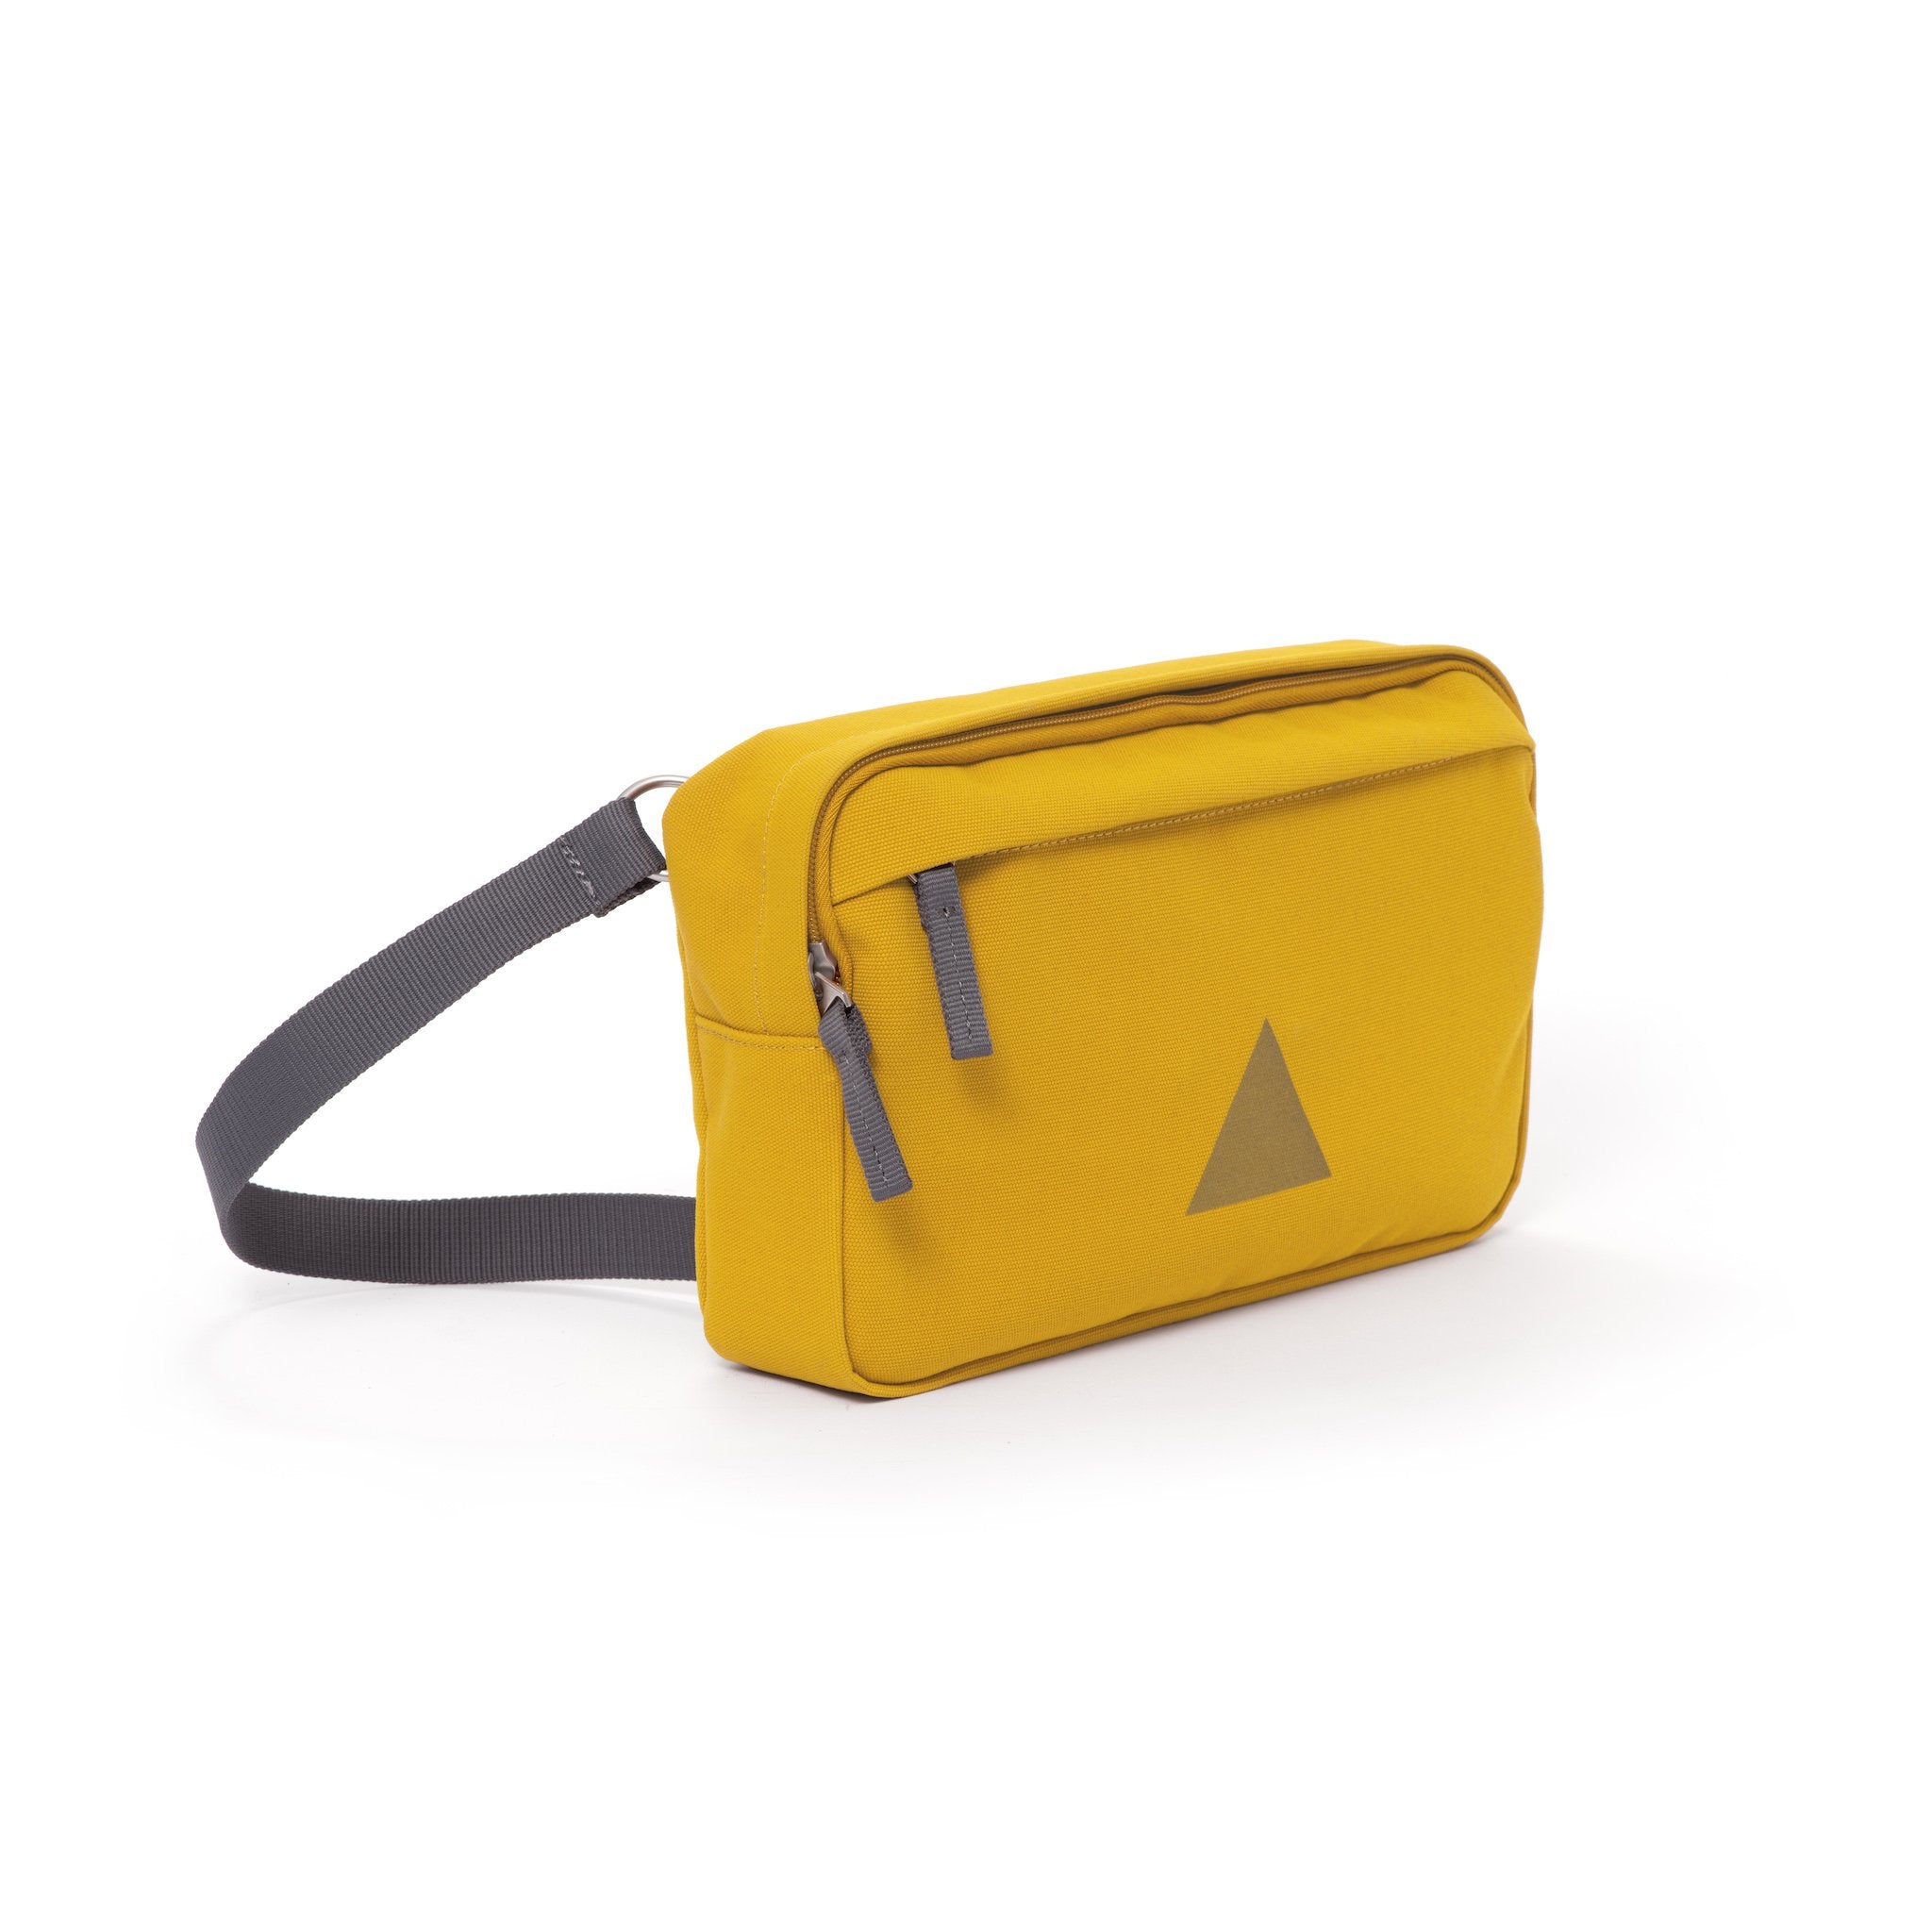 Yellow canvas shoulder bag with zip pockets and webbing strap.